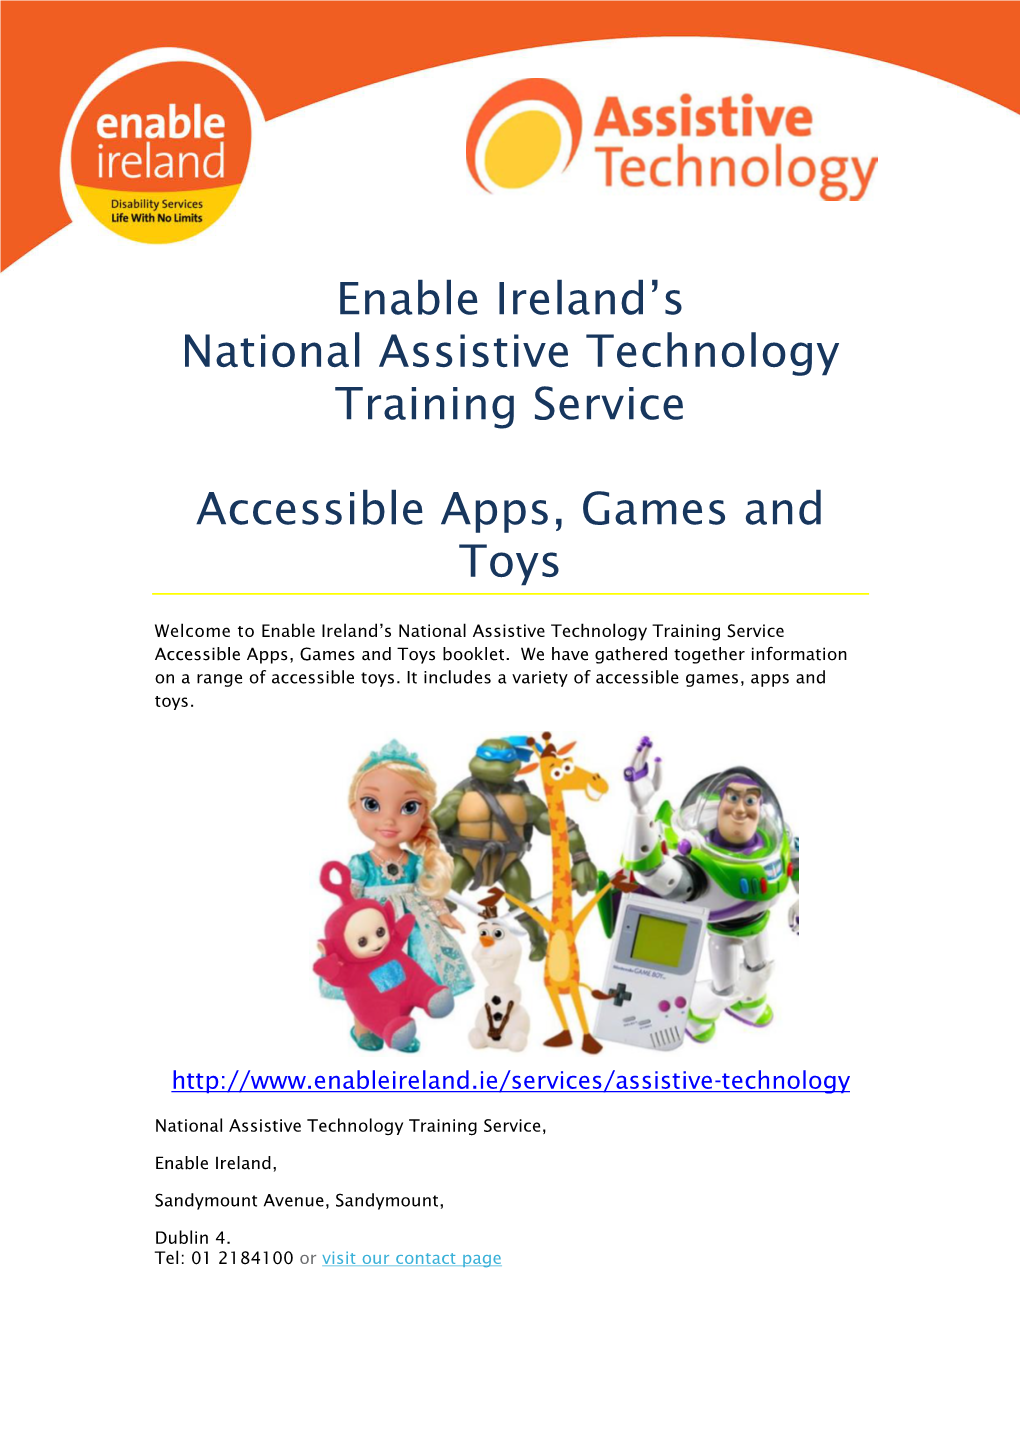 Enable Ireland's National Assistive Technology Training Service Accessible Apps, Games and Toys